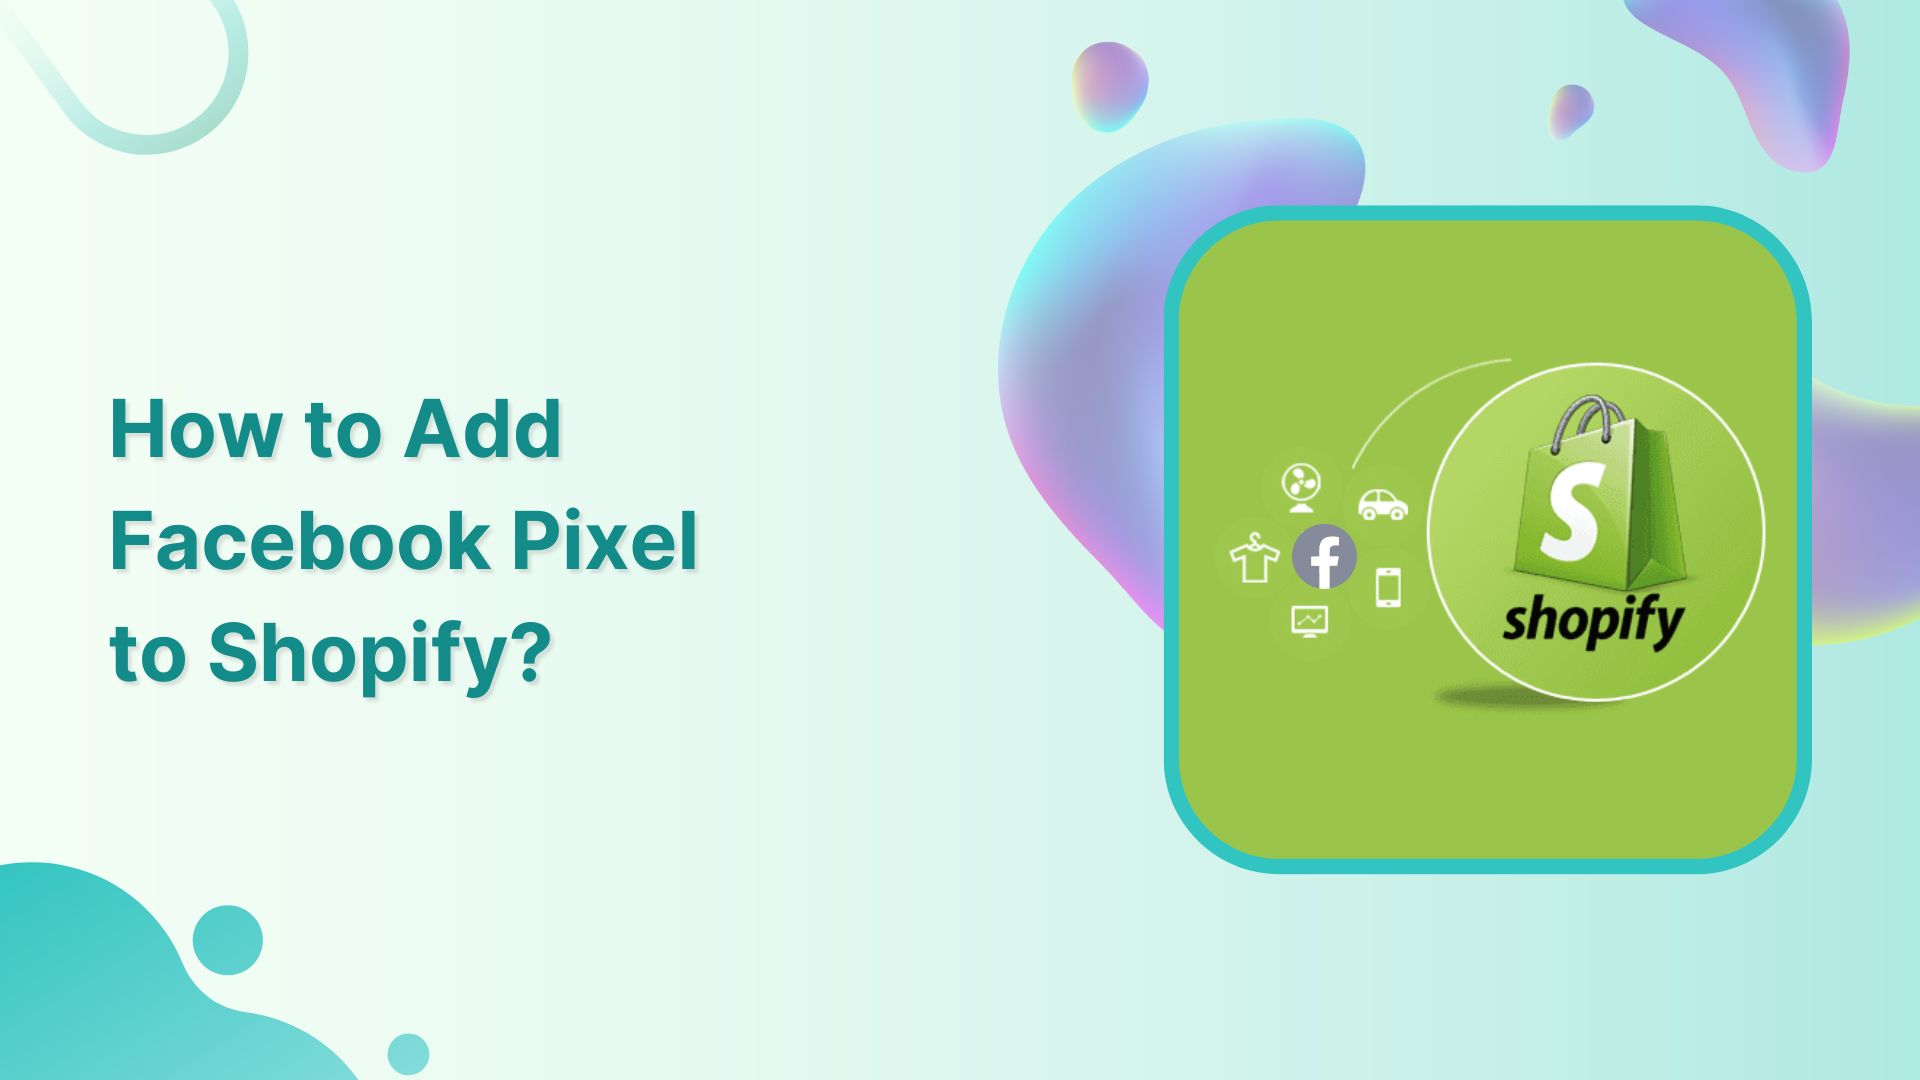 How to Add FB Pixel to Shopify: Step-by-step guide